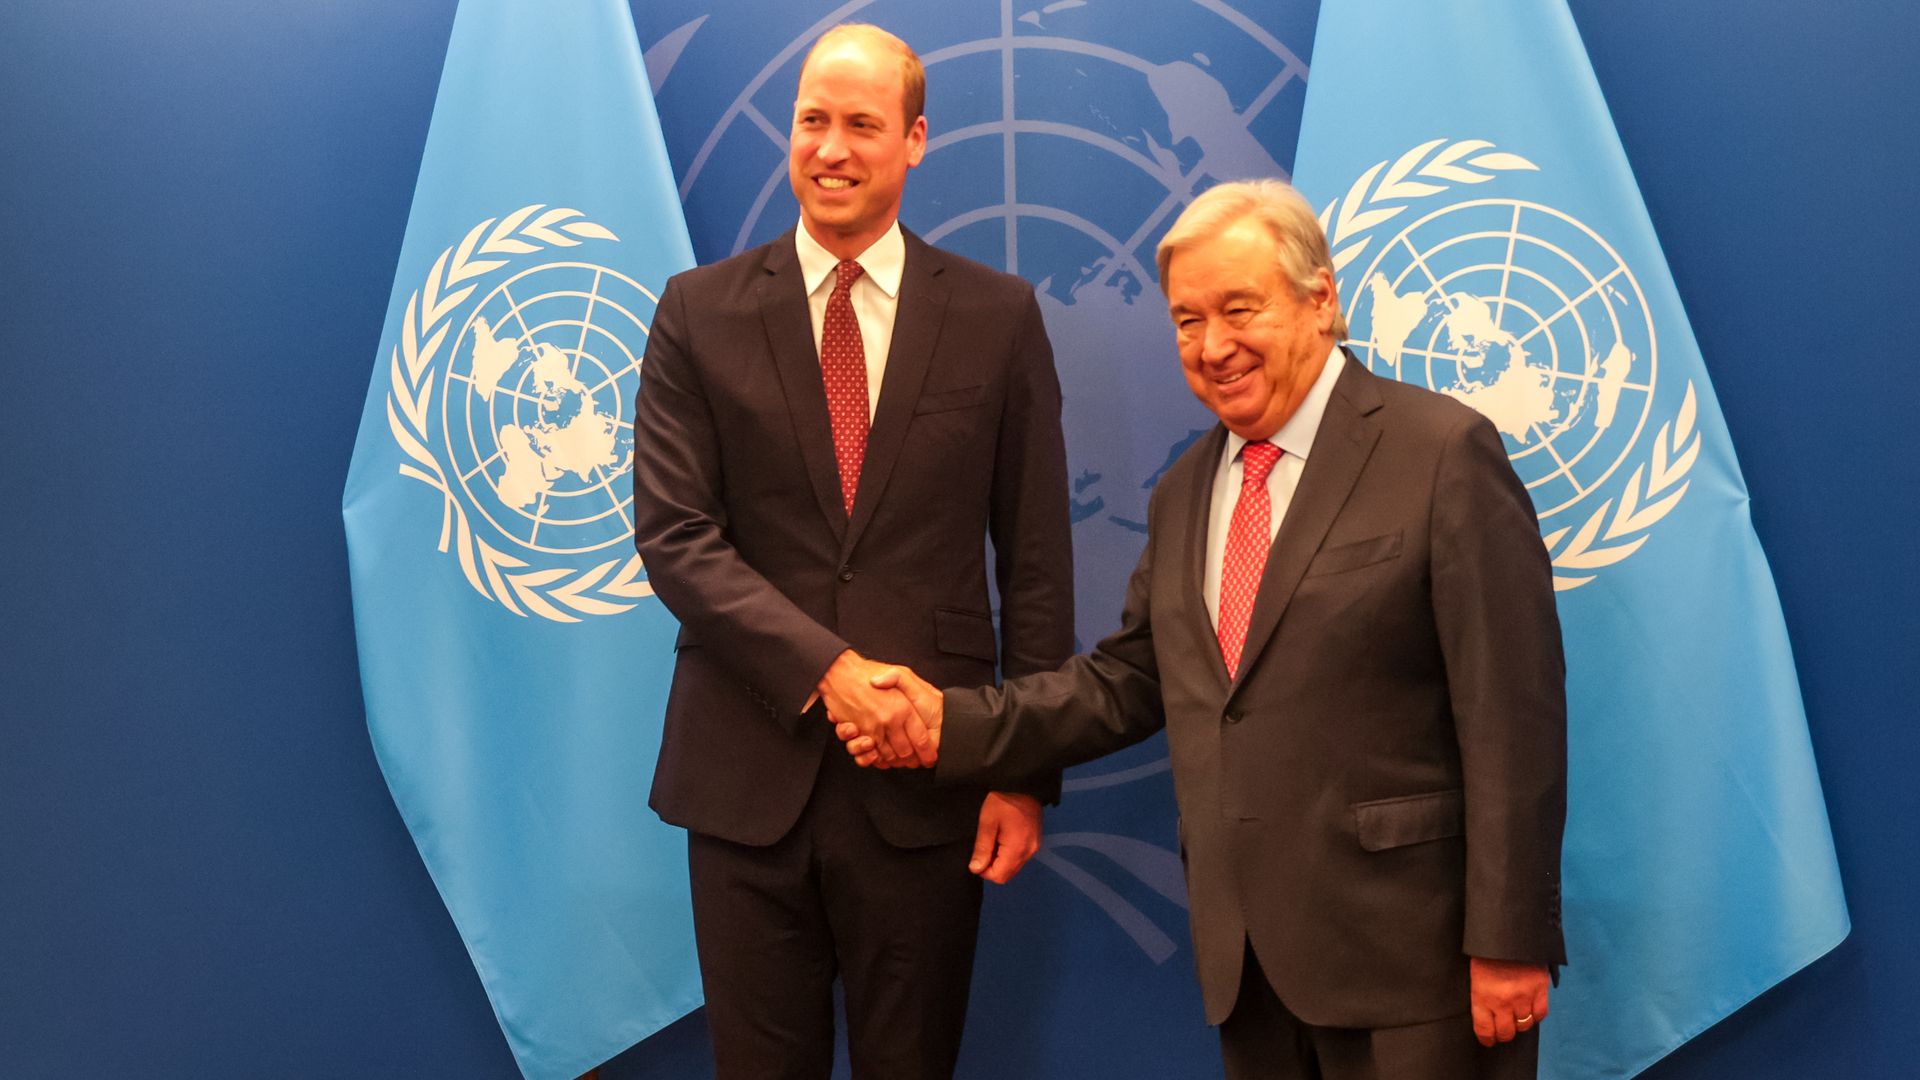 Prince William collaborates with global leaders in New York on climate and development